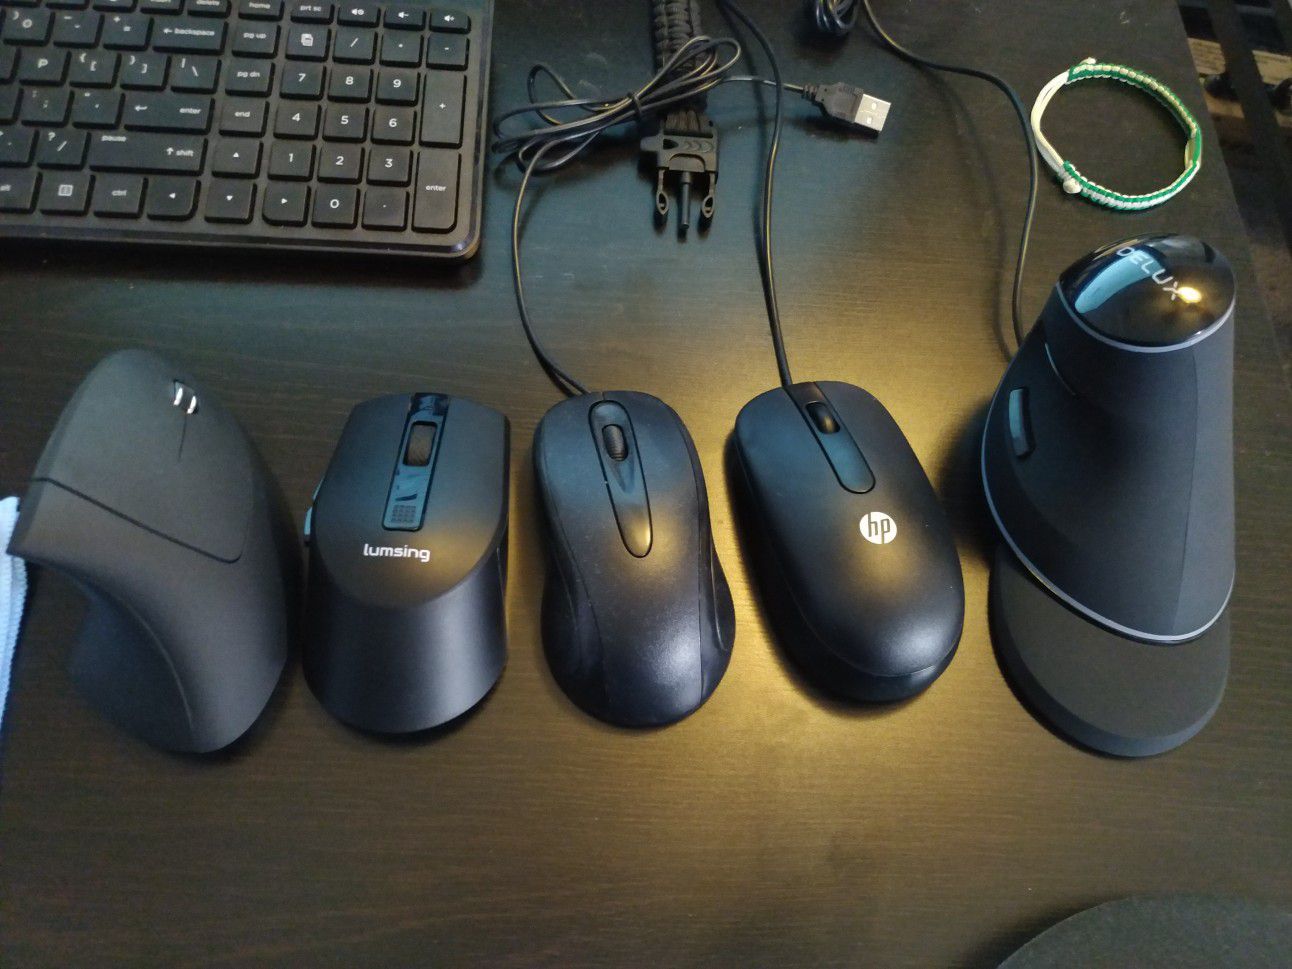 Computer mice for sale.